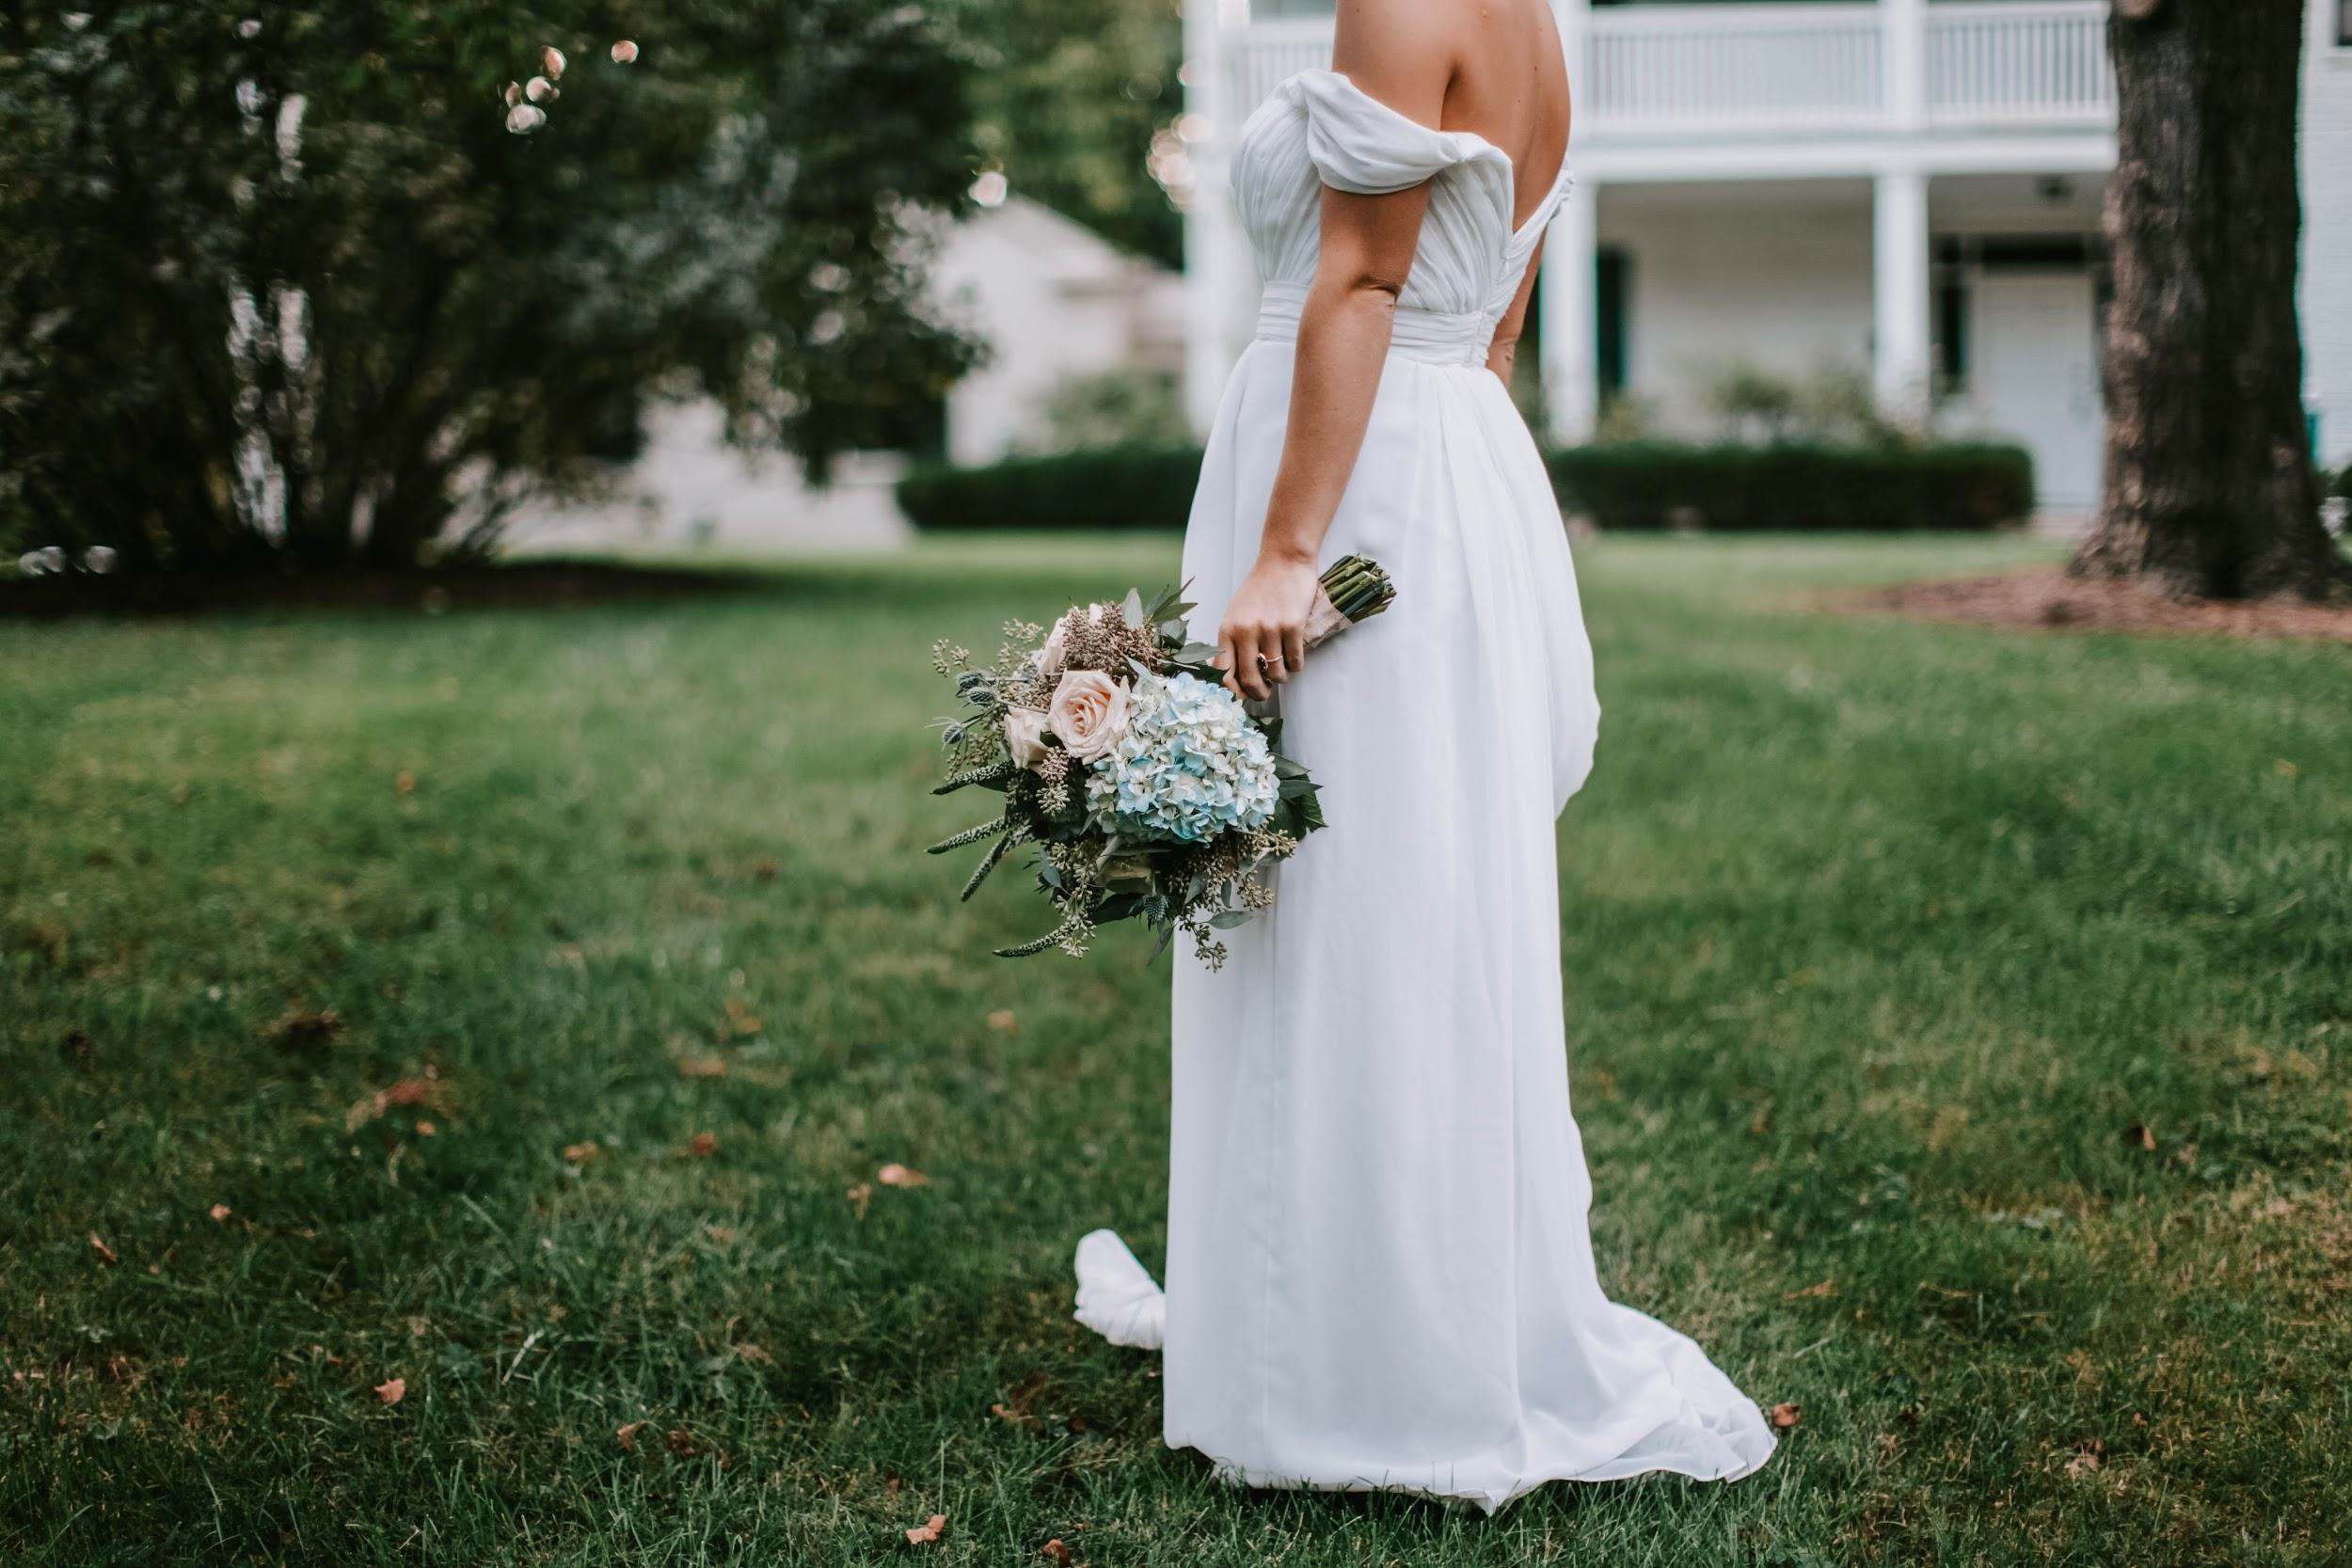 A Bride in an Off-Shoulder Wedding Dresses on the Grass